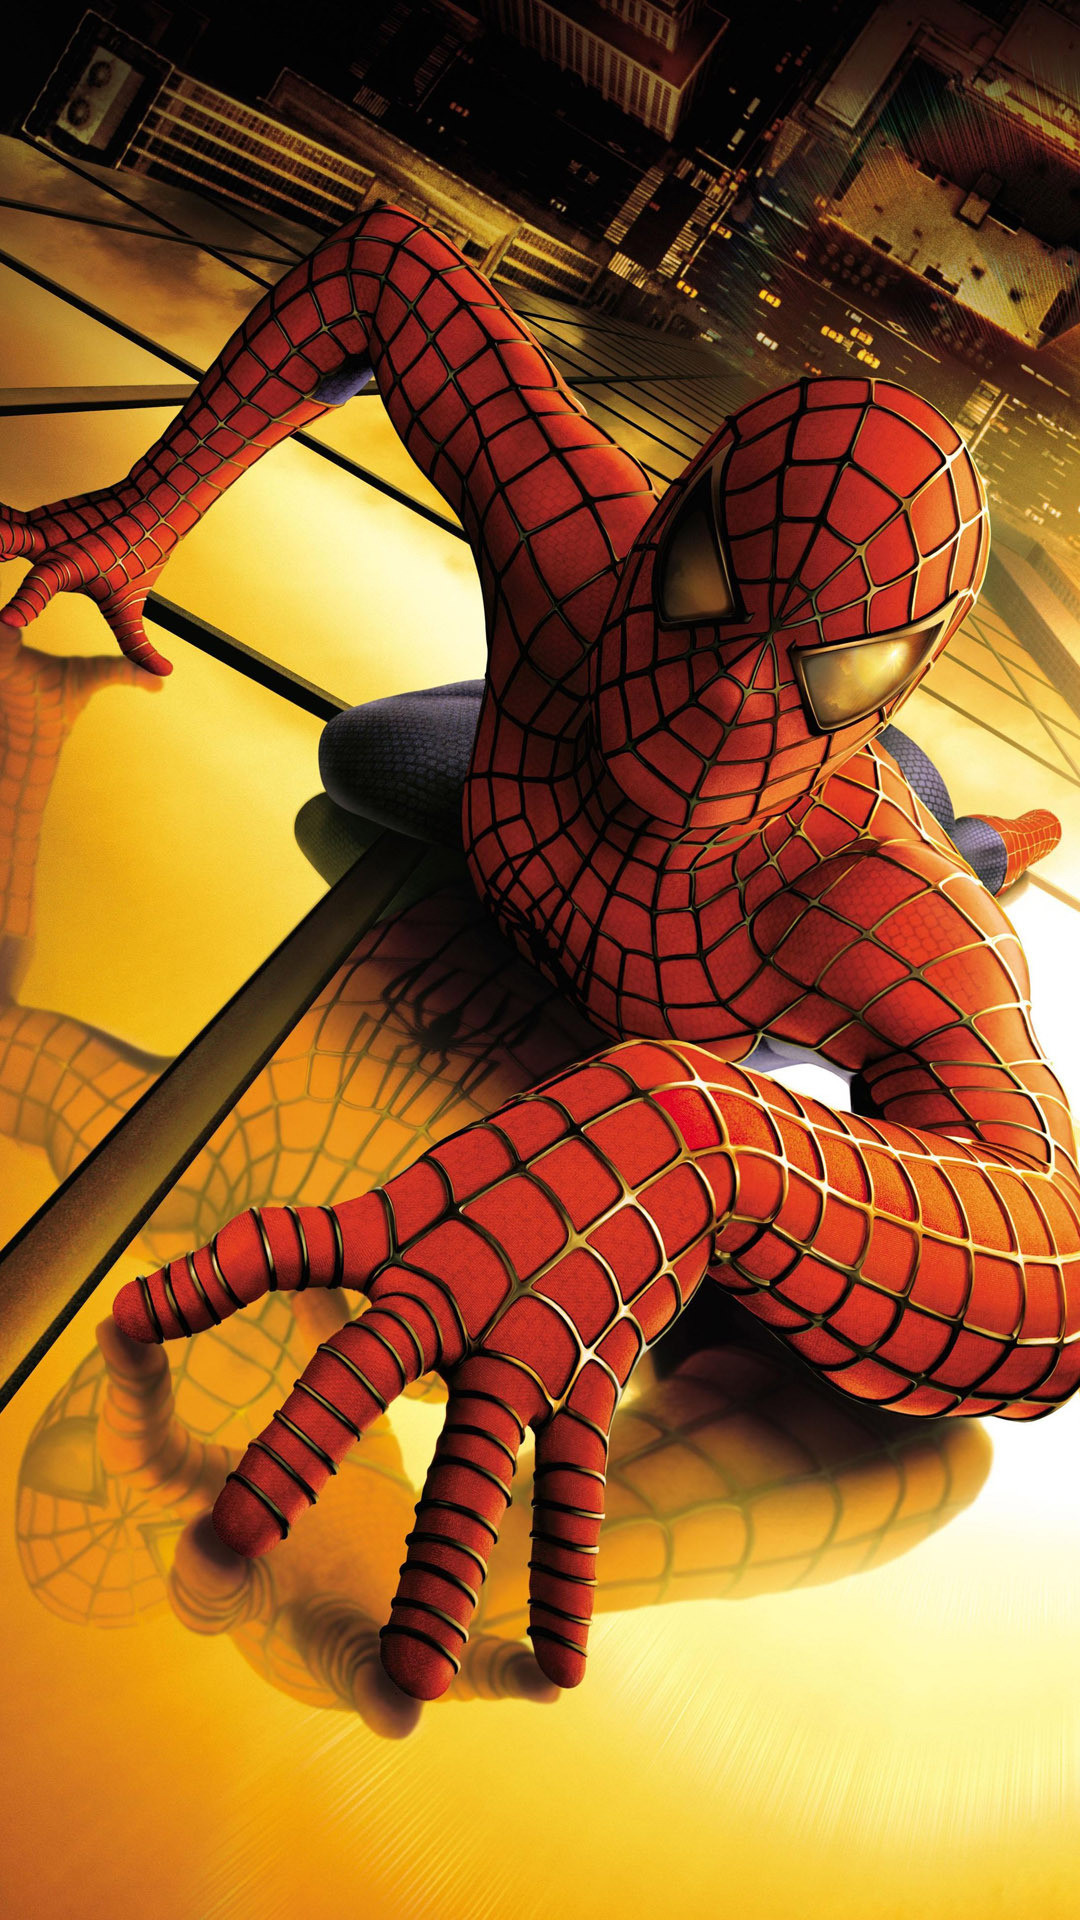 Battle Spiderman. Tap to see more The Spiderman iPhone wallpapers, backgrounds, fondos